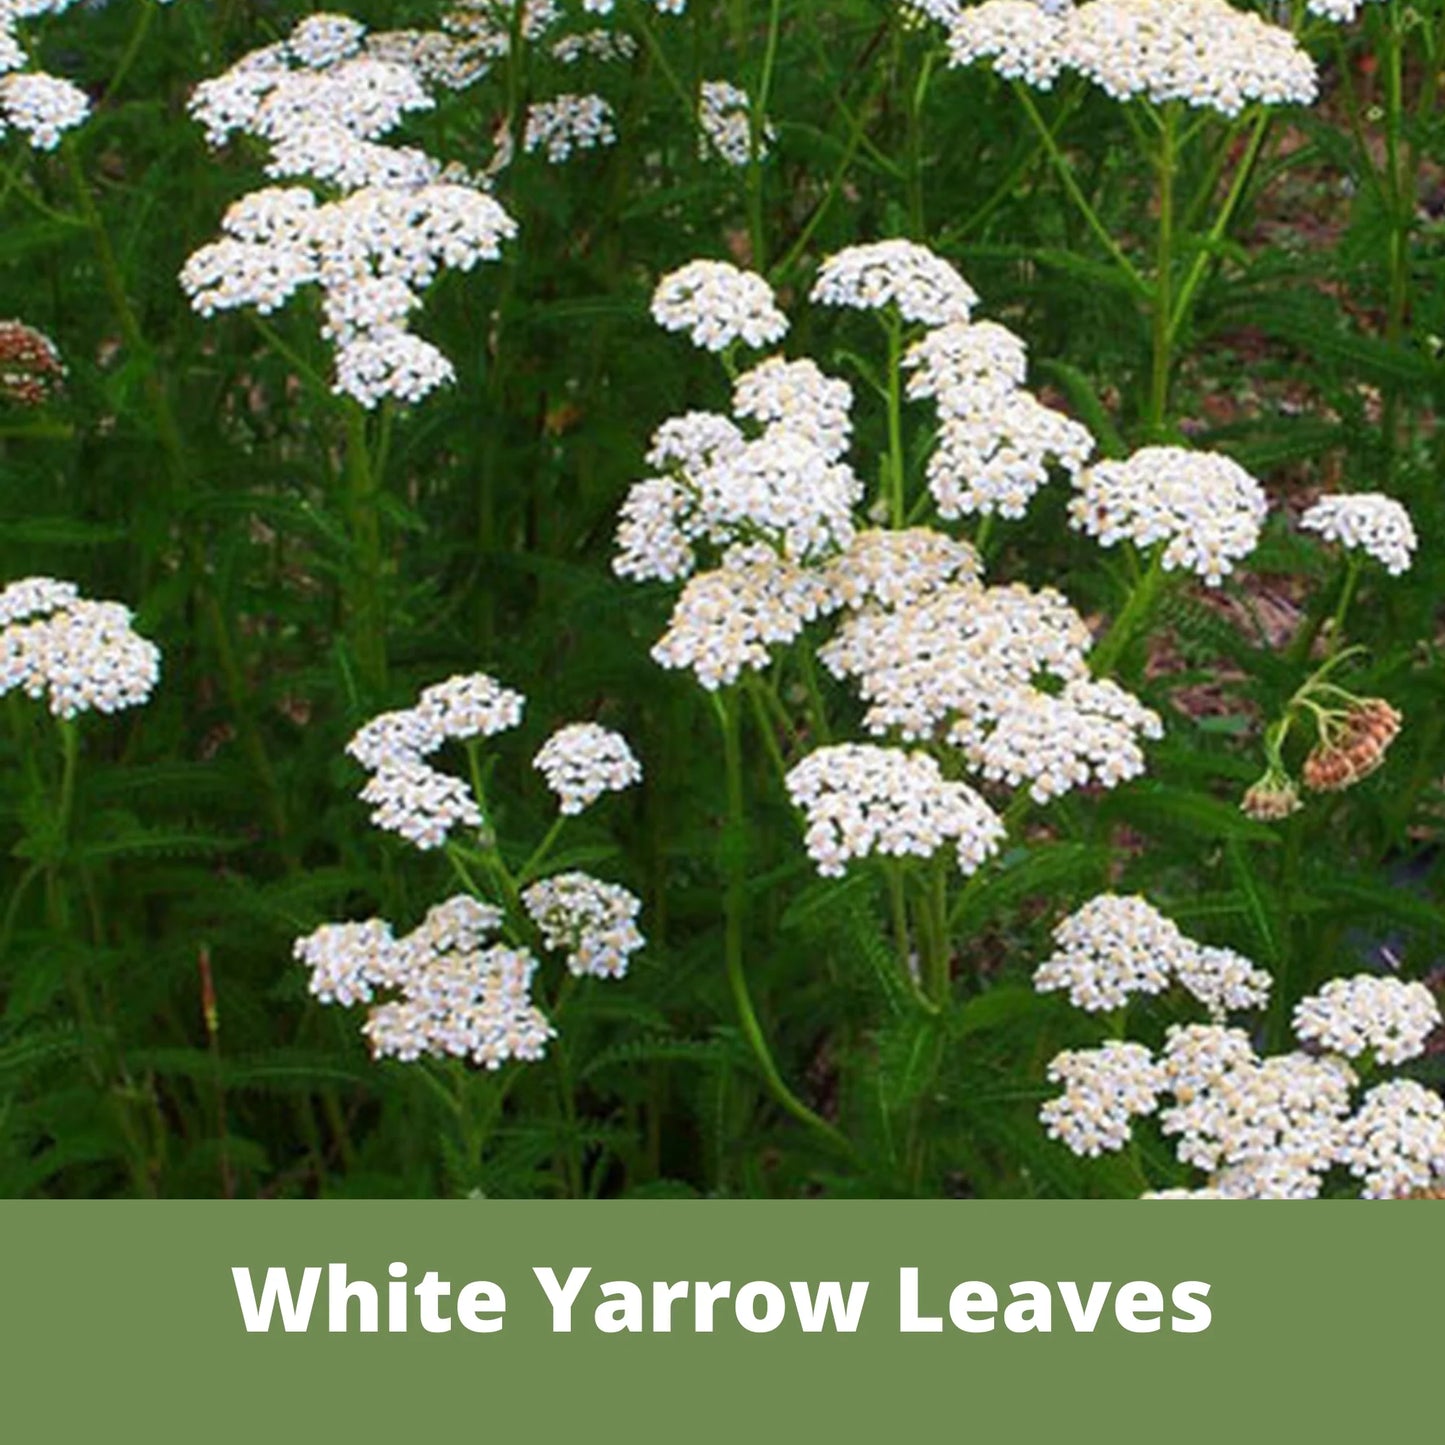 White Yarrow Seed Pouch